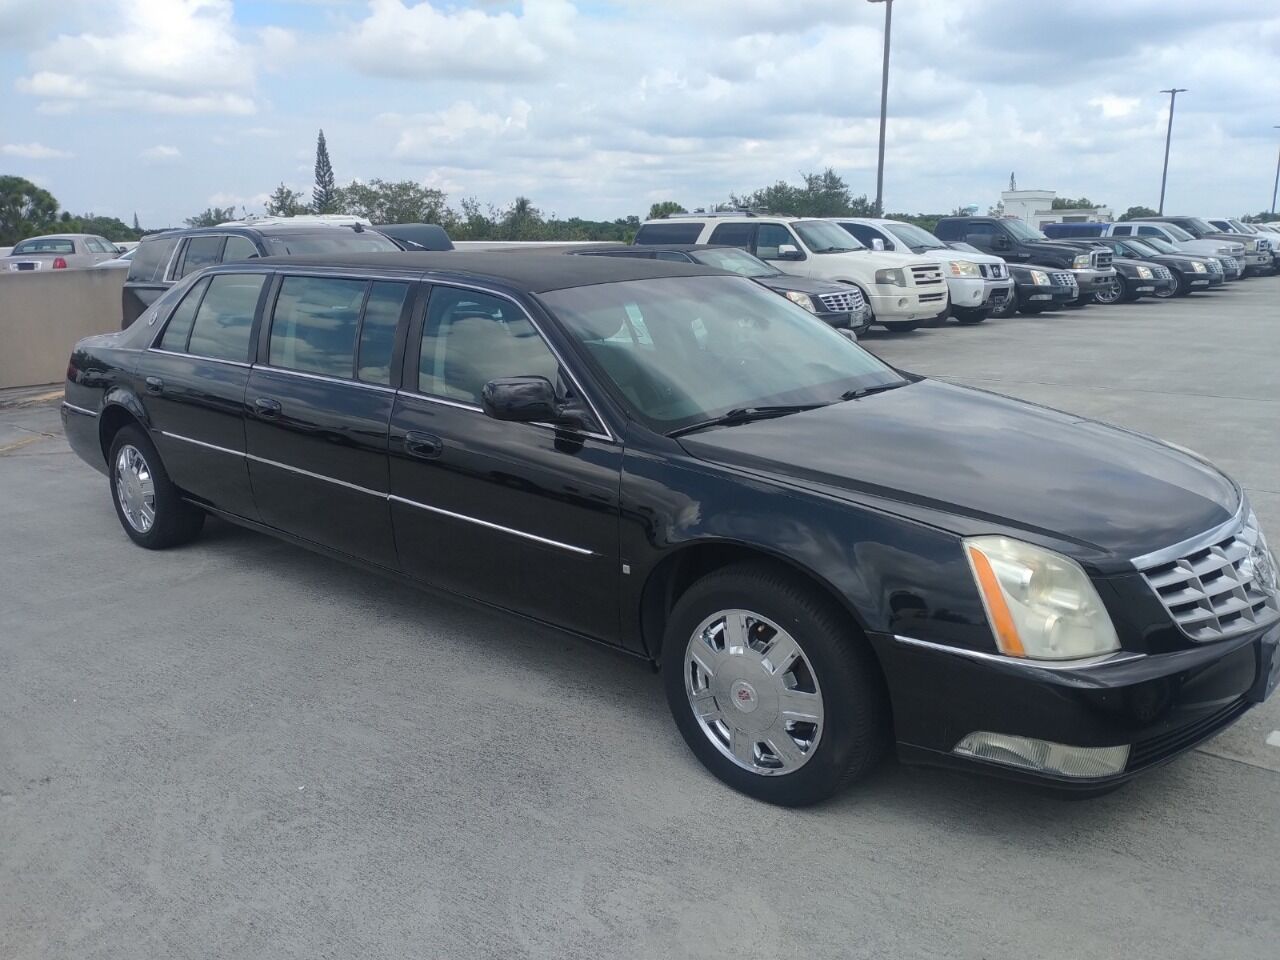 2008 Cadillac Limousine Professional Chassis Incomplete - $11,950